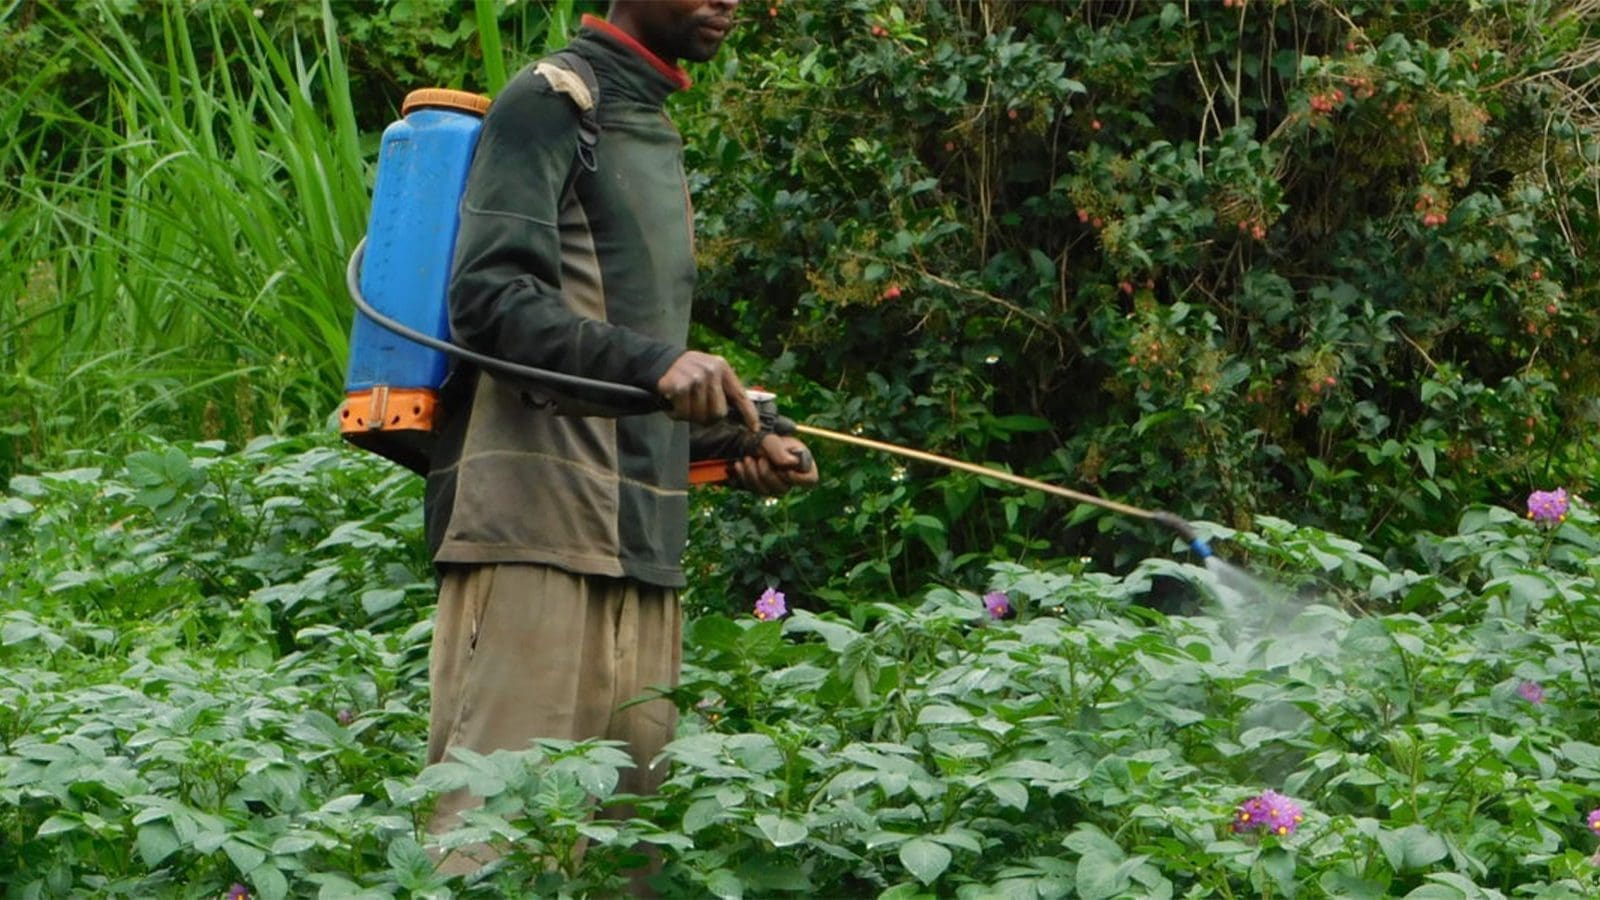 Rwanda takes steps to curb illegal pesticides, promote sustainable agriculture